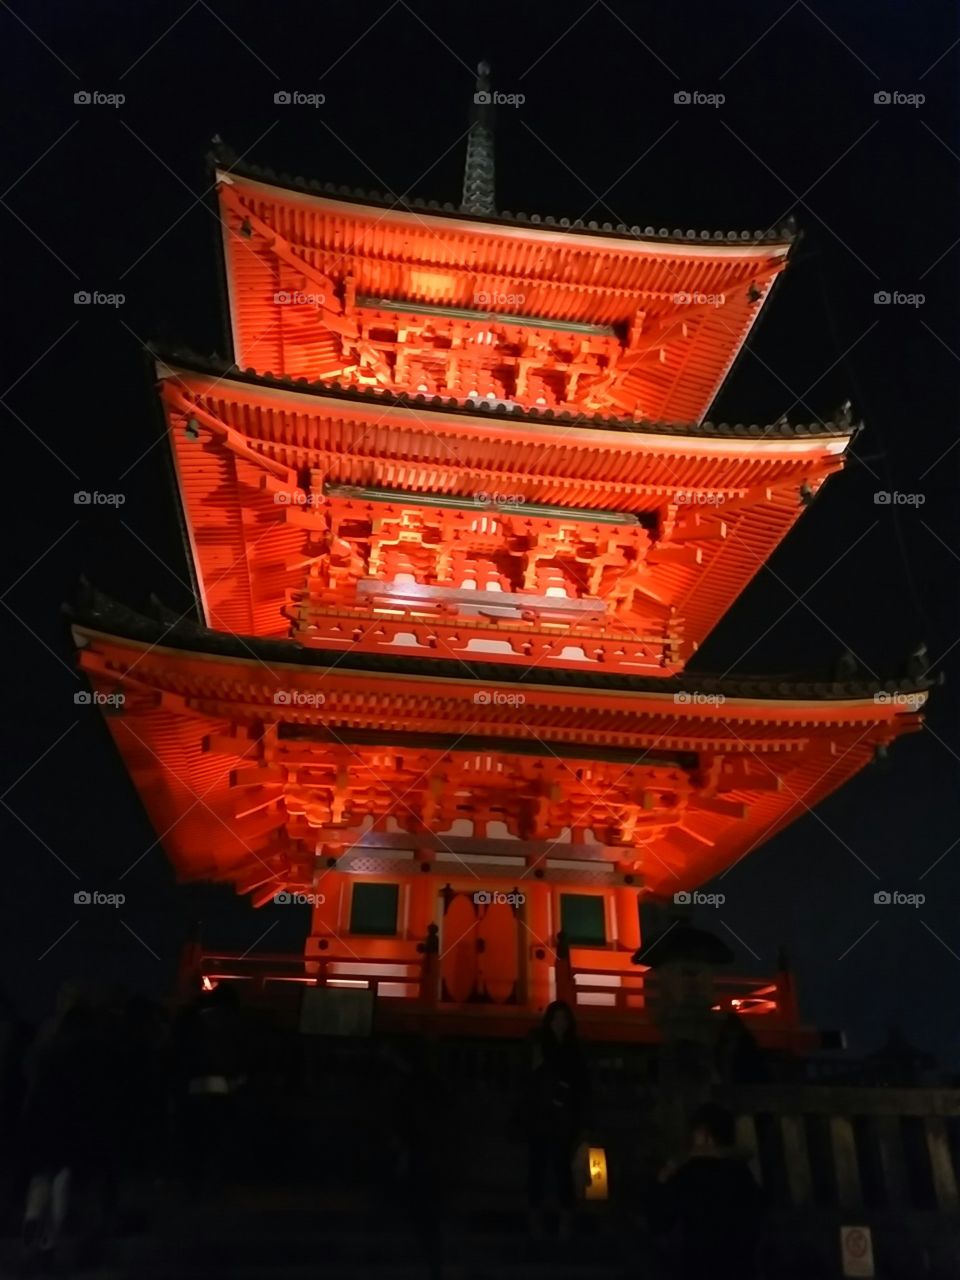 my favorite temple!
people enjoy this bright color for hundreds years in Kyoto, Japan. when i close my eyes, still i can feel this bright red in the darkness.